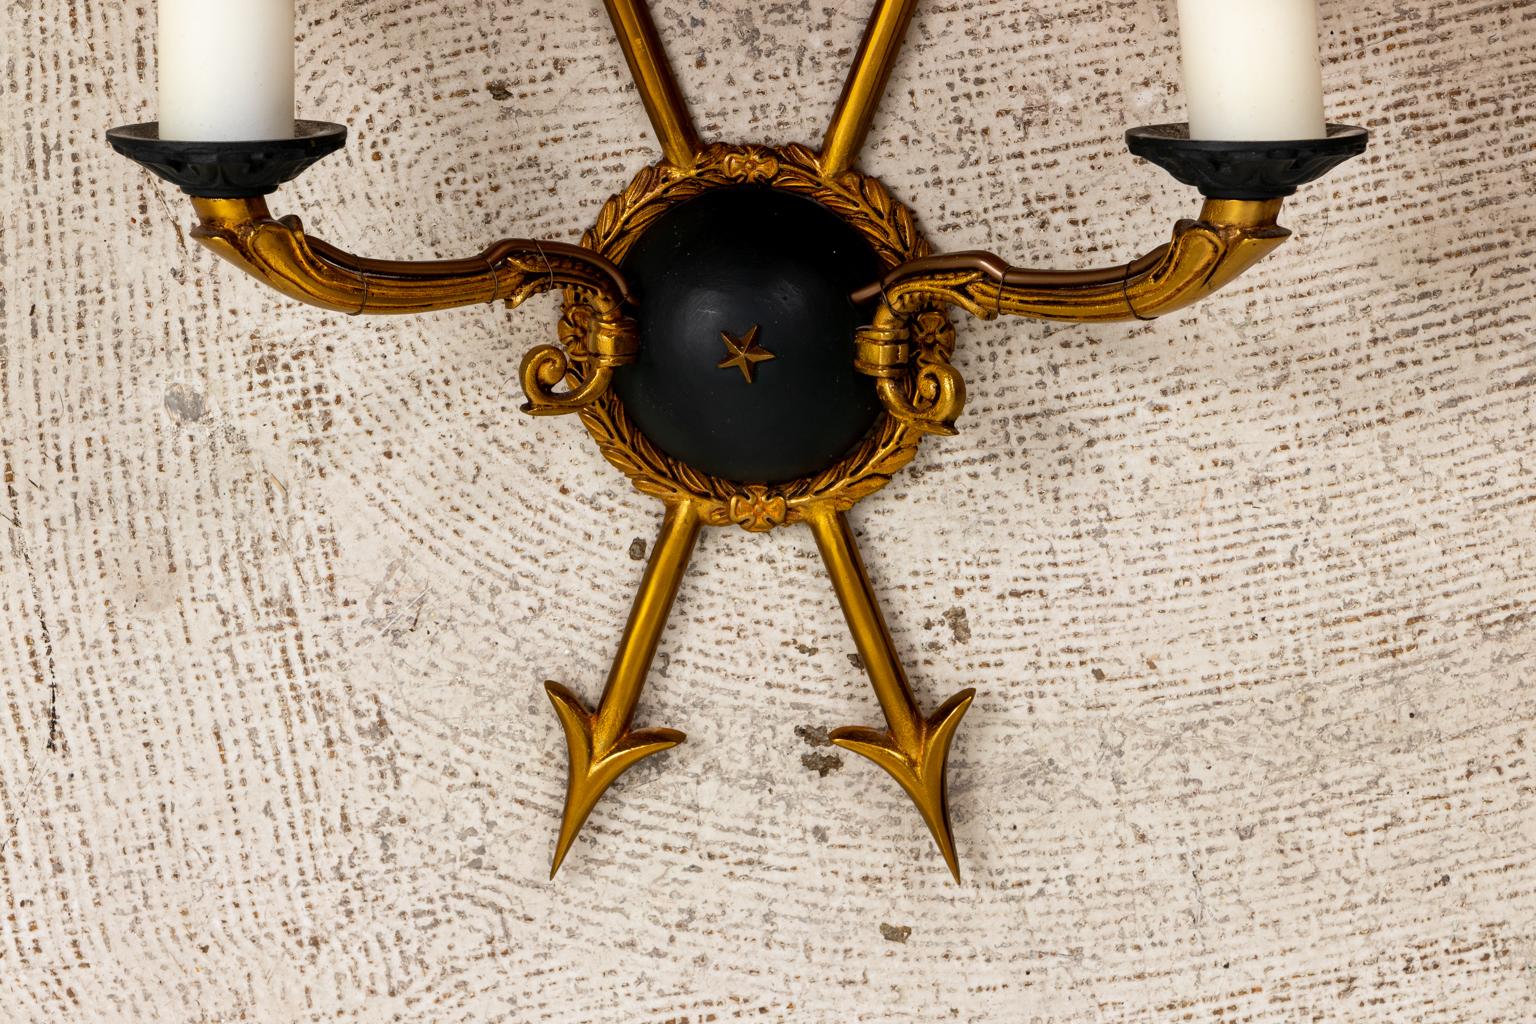 Circa 1960s pair of electrified painted brass sconces in the Directoire style that features a crossed arrow motif behind the double arm scrolled foliage shaped candle holder lights. The central ebonized dome is accented with a central star motif in